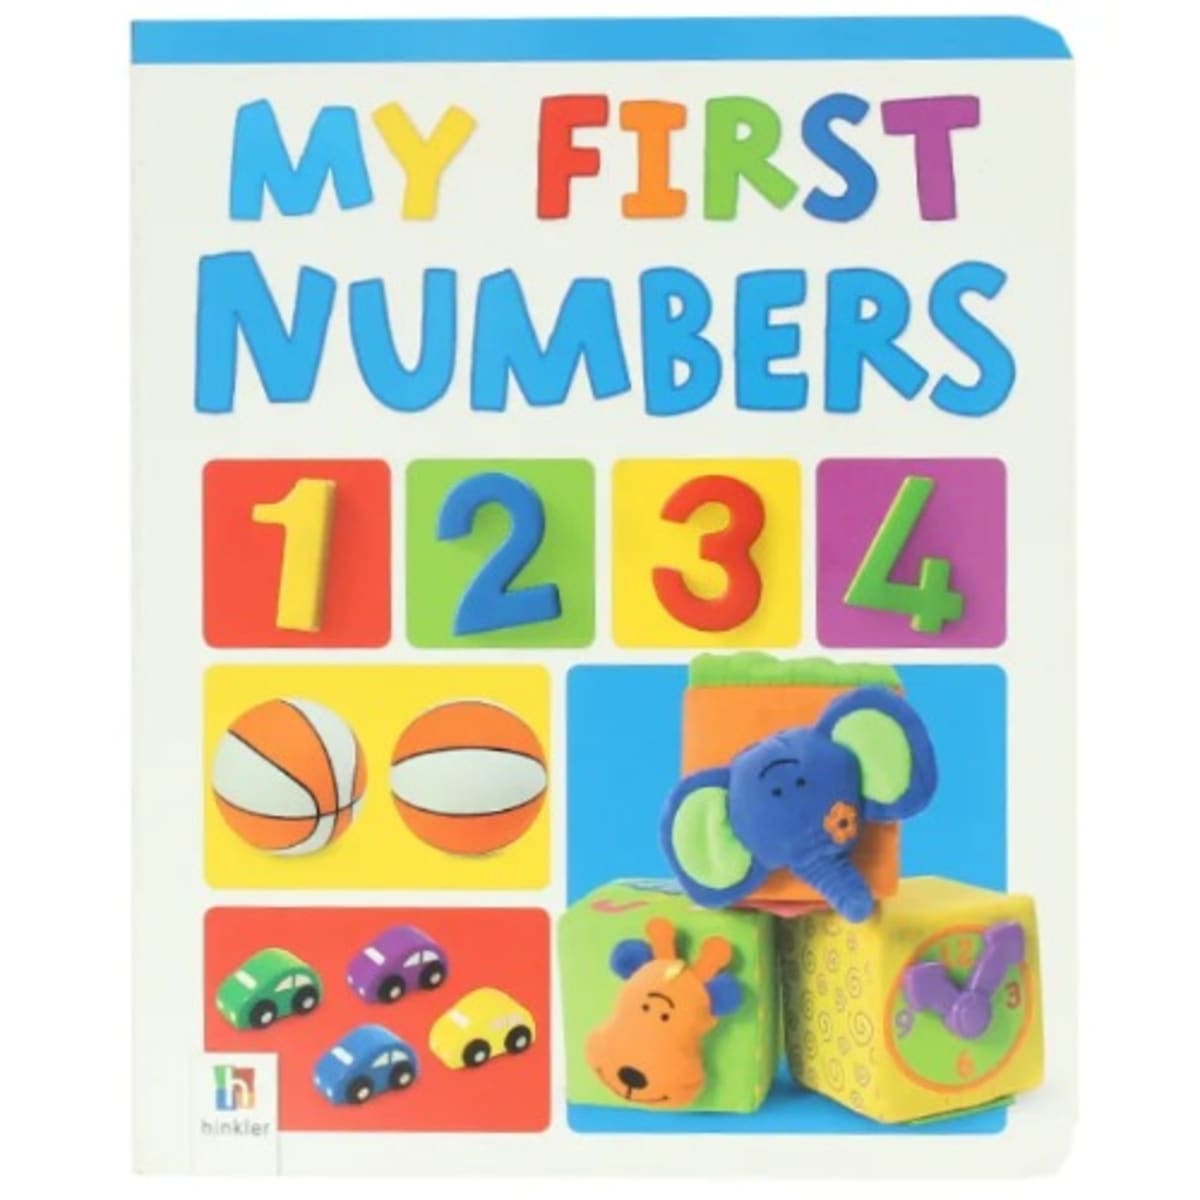 Board　Book　Online　Konga　Numbers　My　Baby　First　Shopping